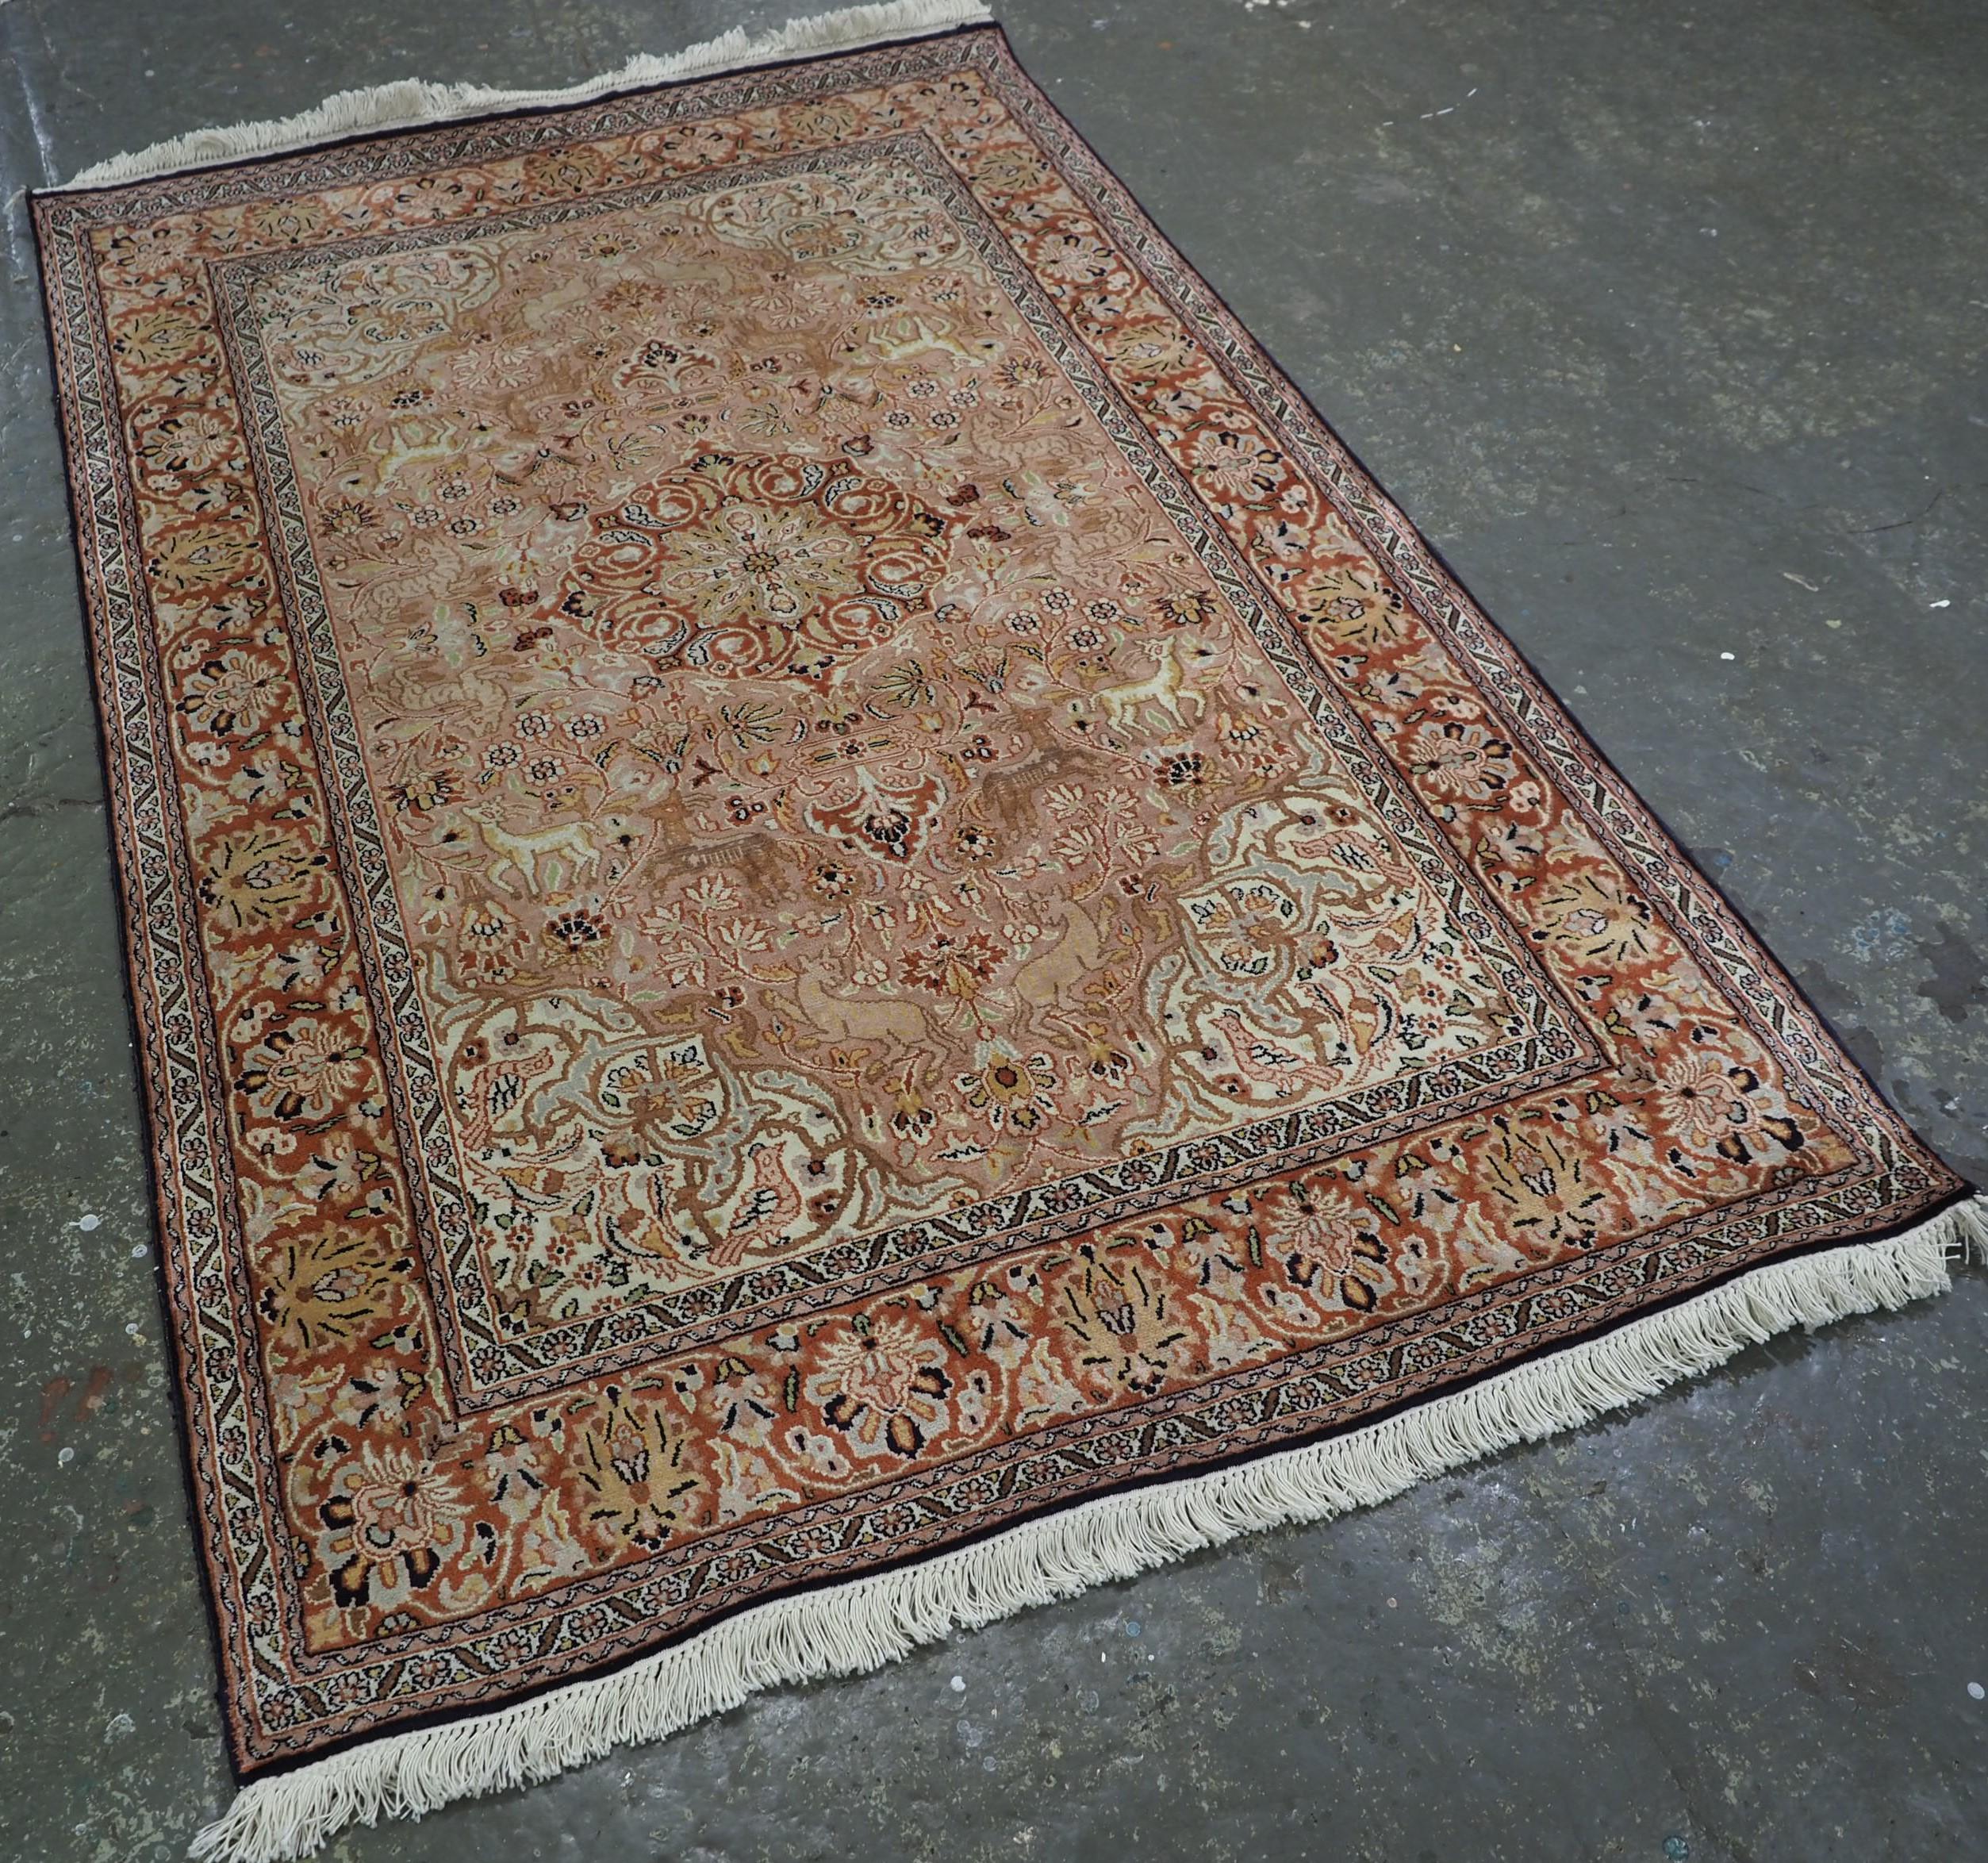 
Size: 6ft 0in x 4ft 0in (184 x 123cm).

A good example of a Kashmir silk rug with a small medallion design, surrounded by a garden of animals and flowers.

About 30 years old.

The rug has a very soft colour palette with warm tones, making it ideal